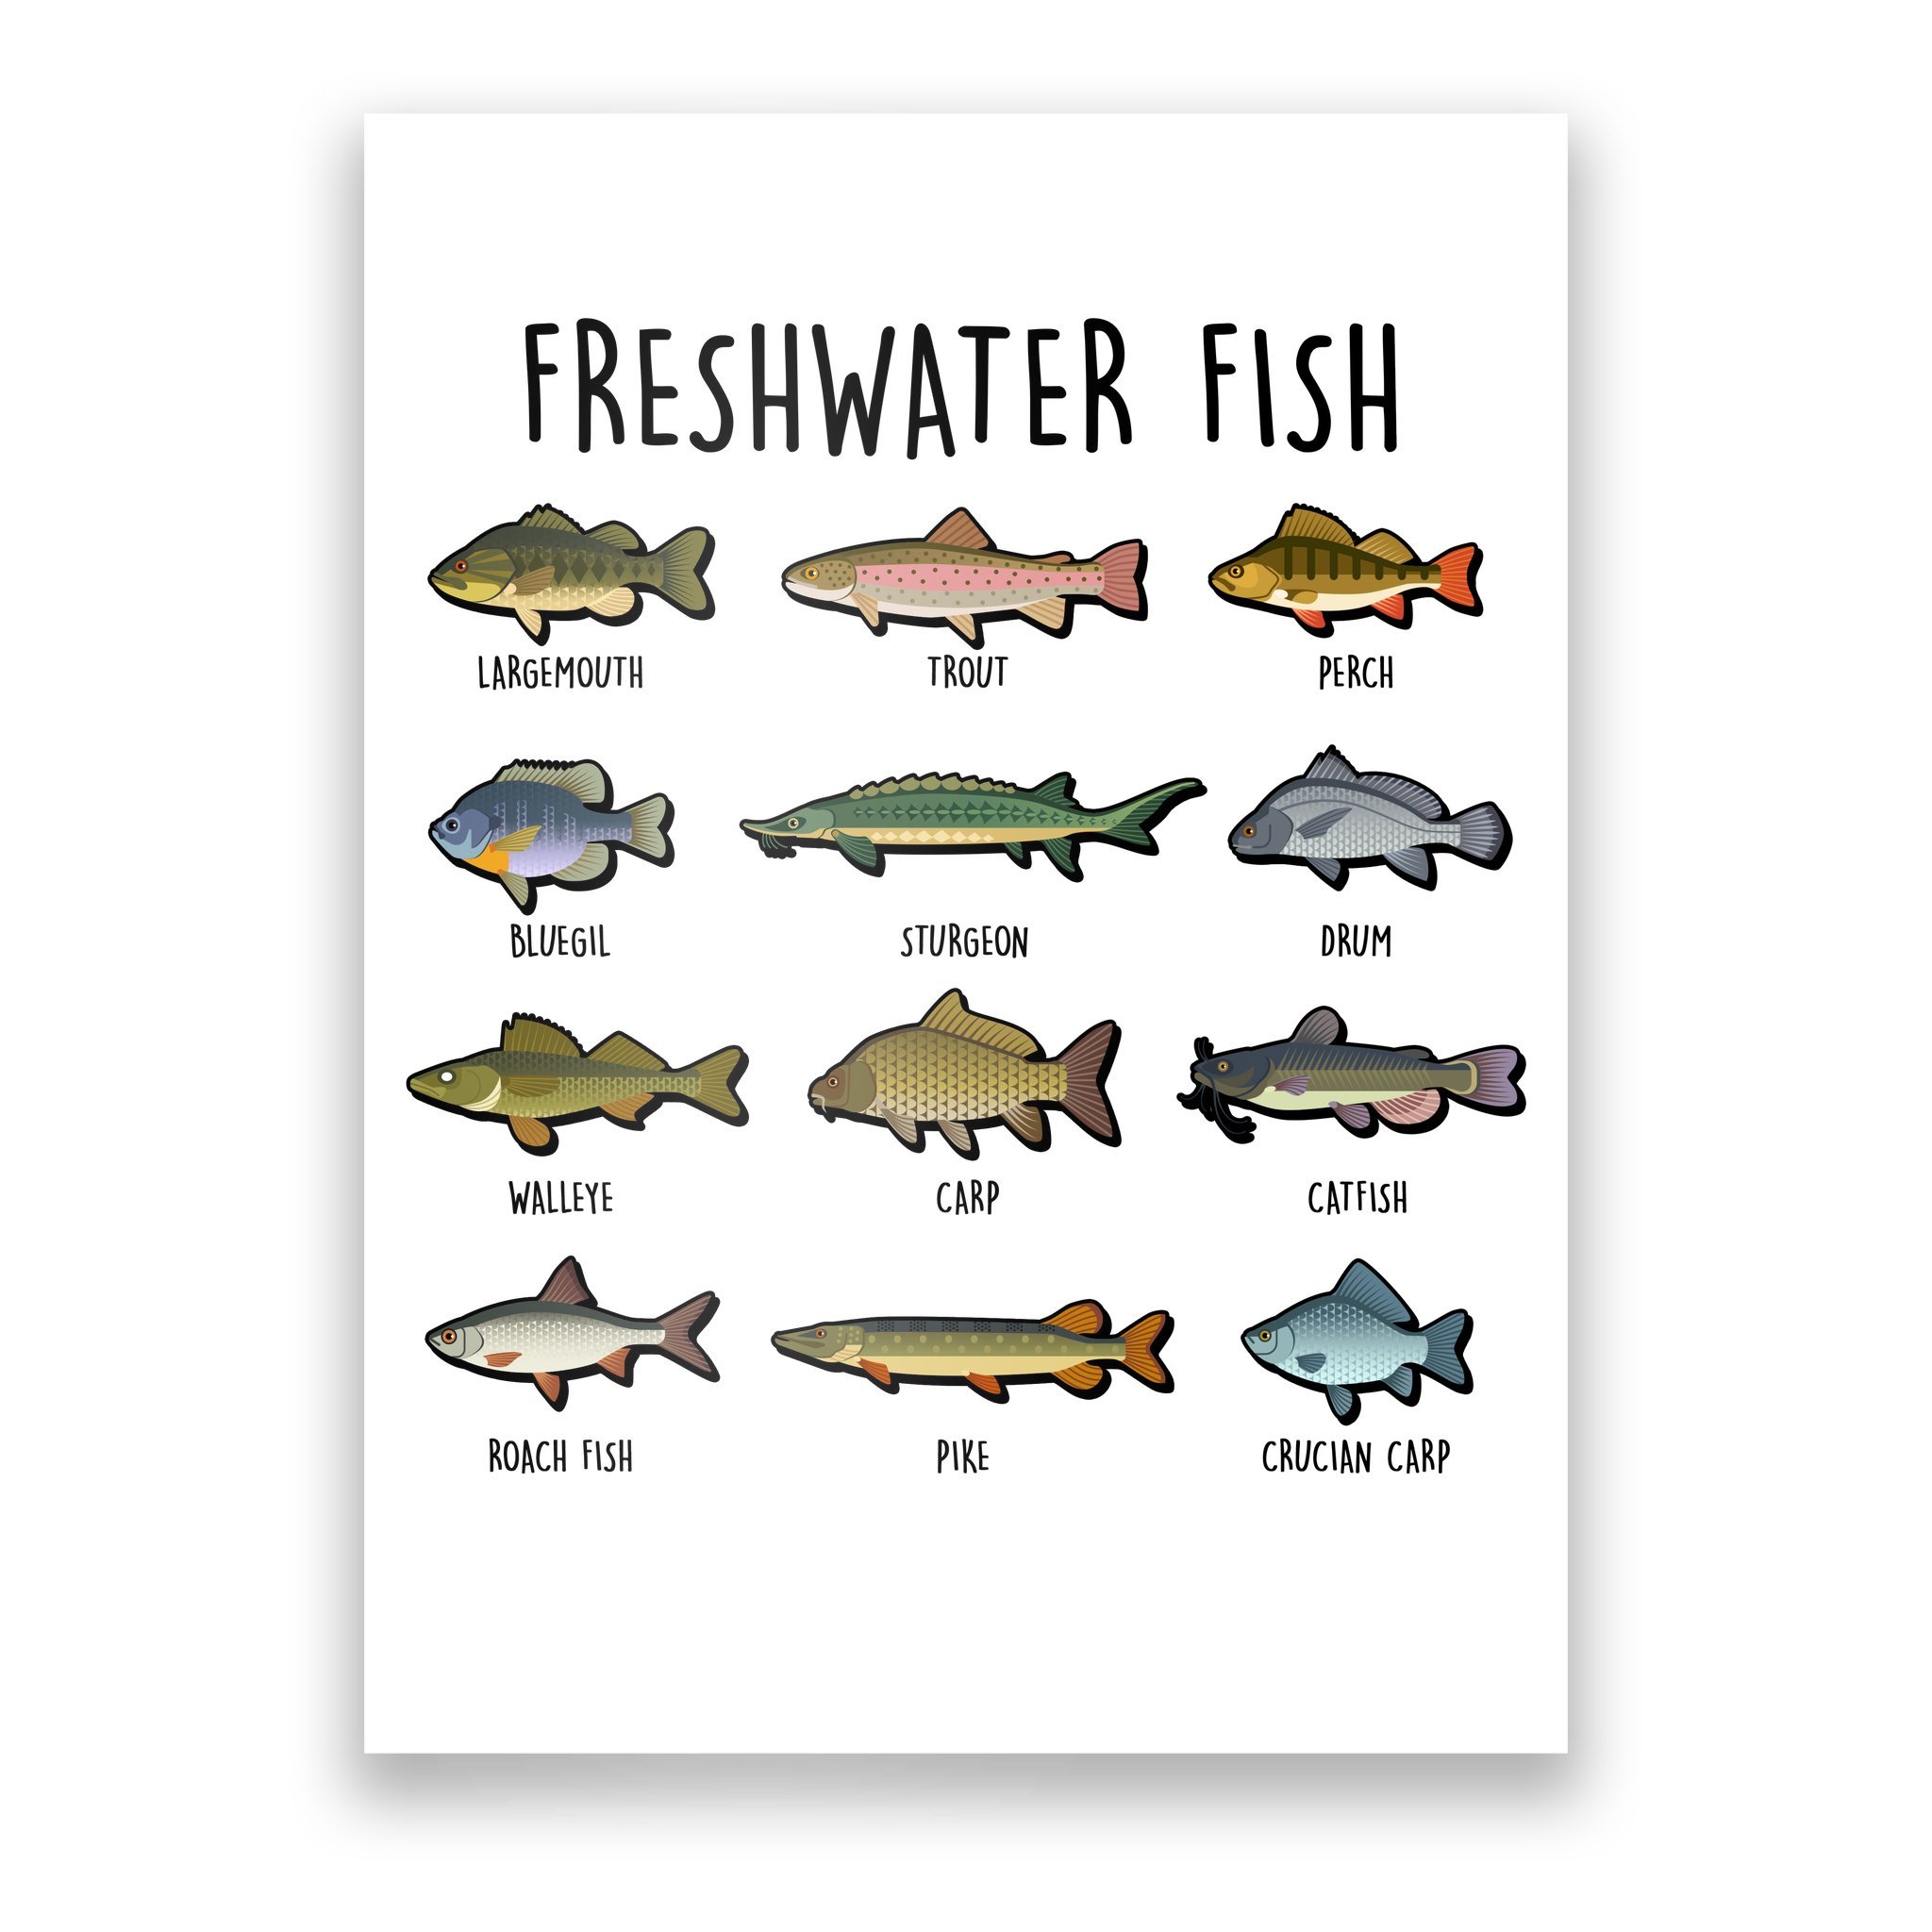 Freshwater Fishes of the Northeast Poster - 13x19 inch print by Matt  Patterson - fishing print, cabin decor, fish poster